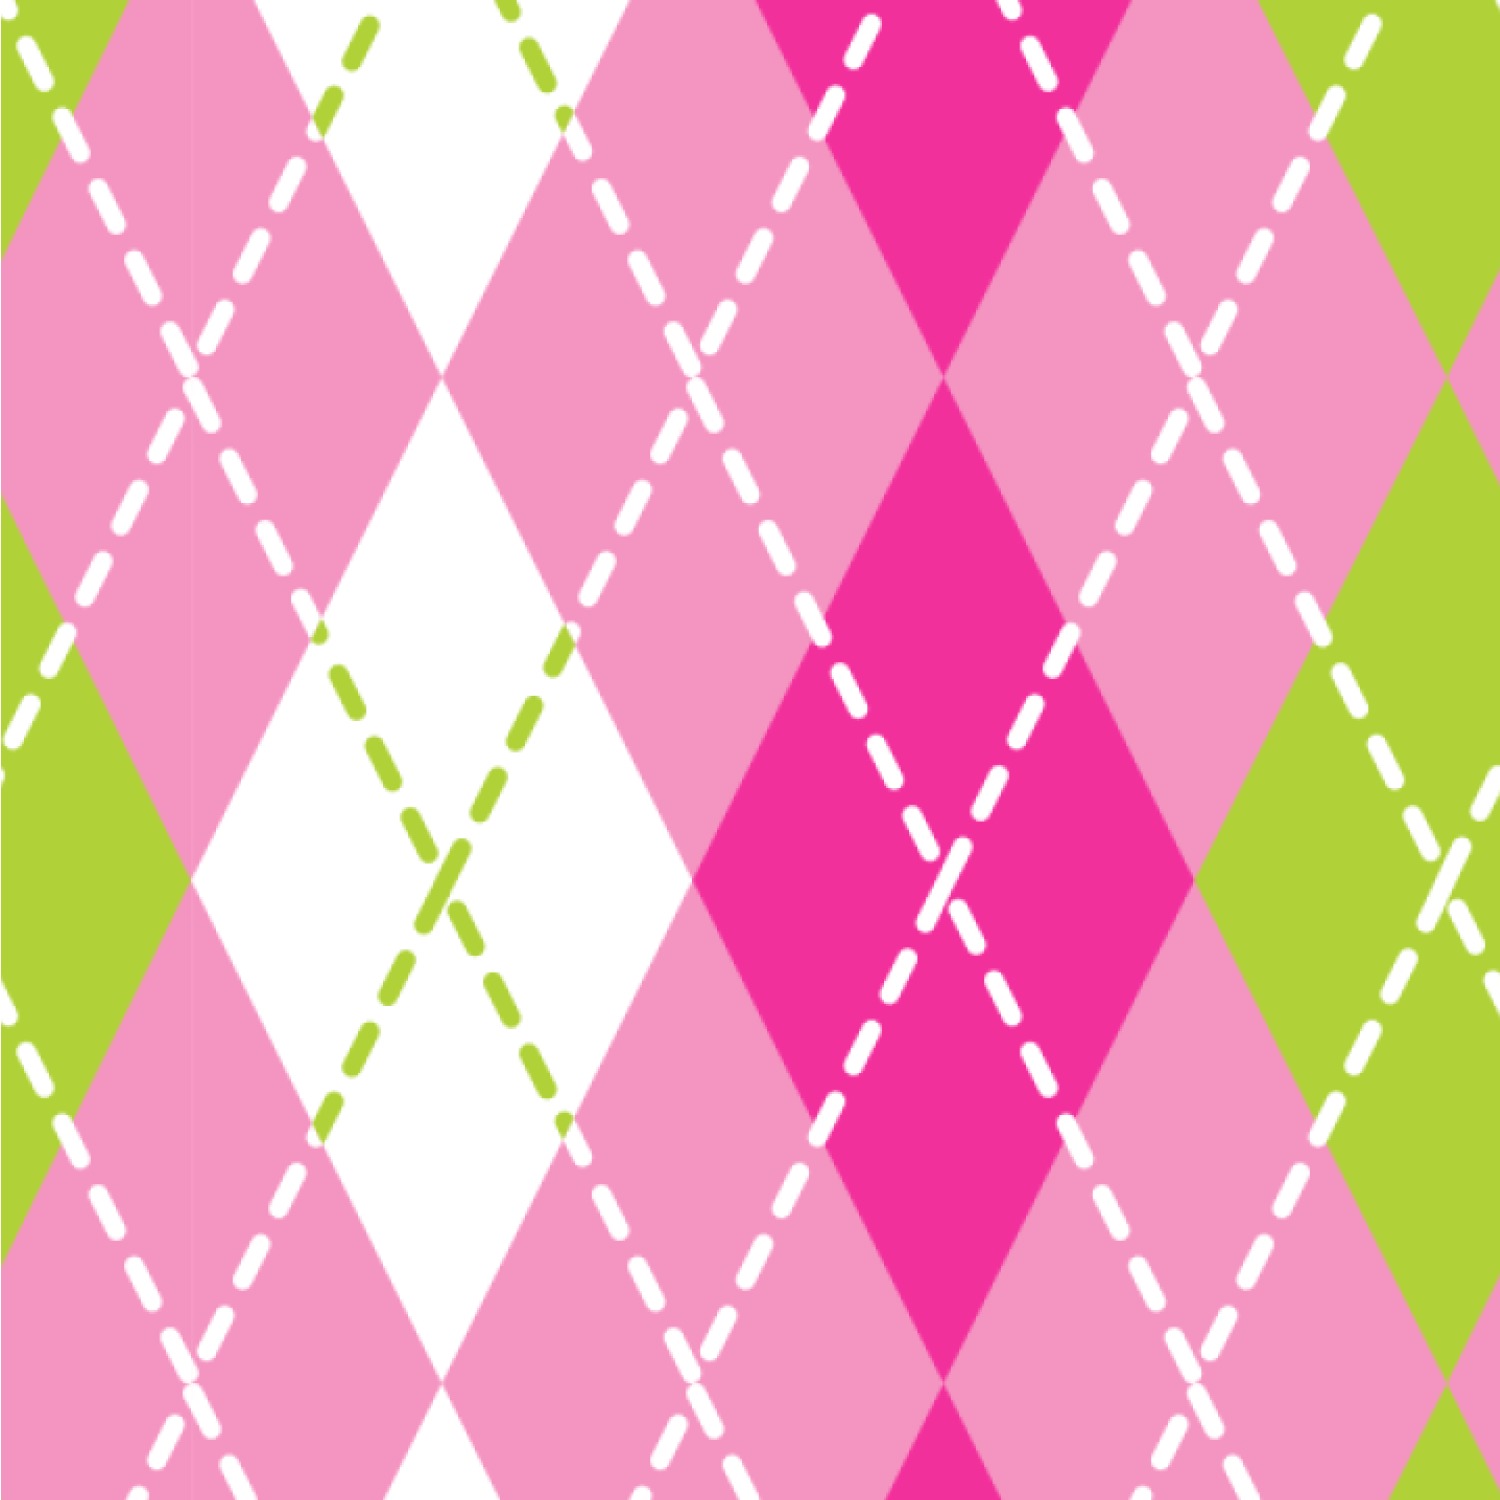 Pink And Green Argyle - HD Wallpaper 